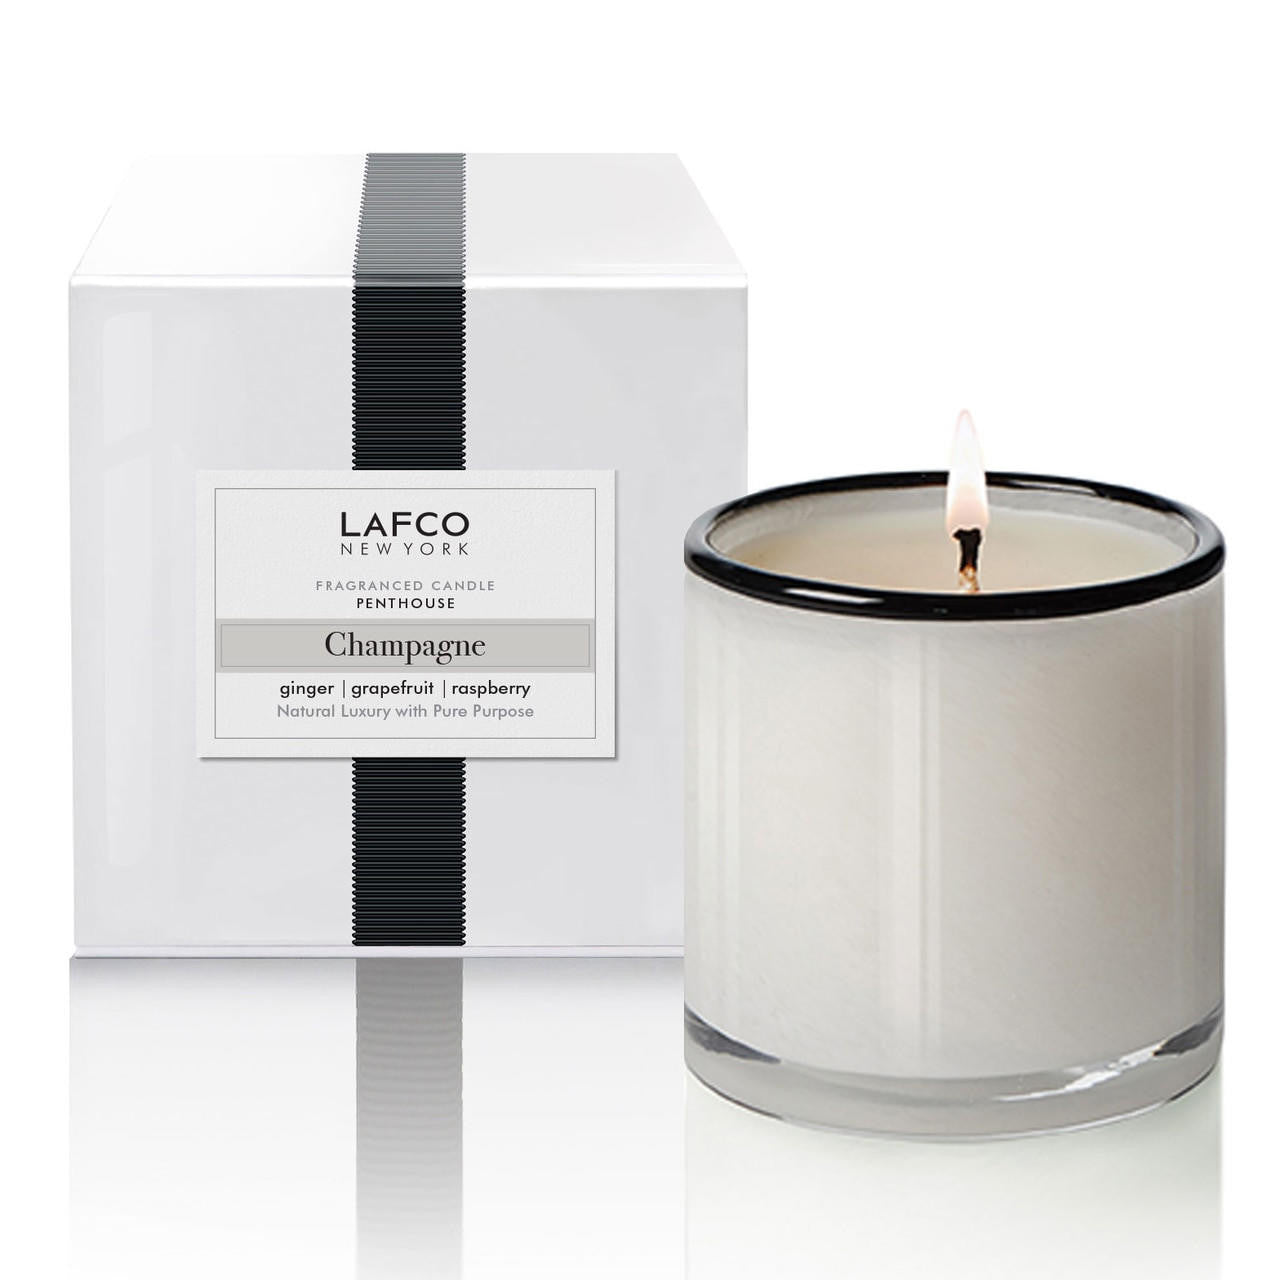  Lafco Champagne Candle 